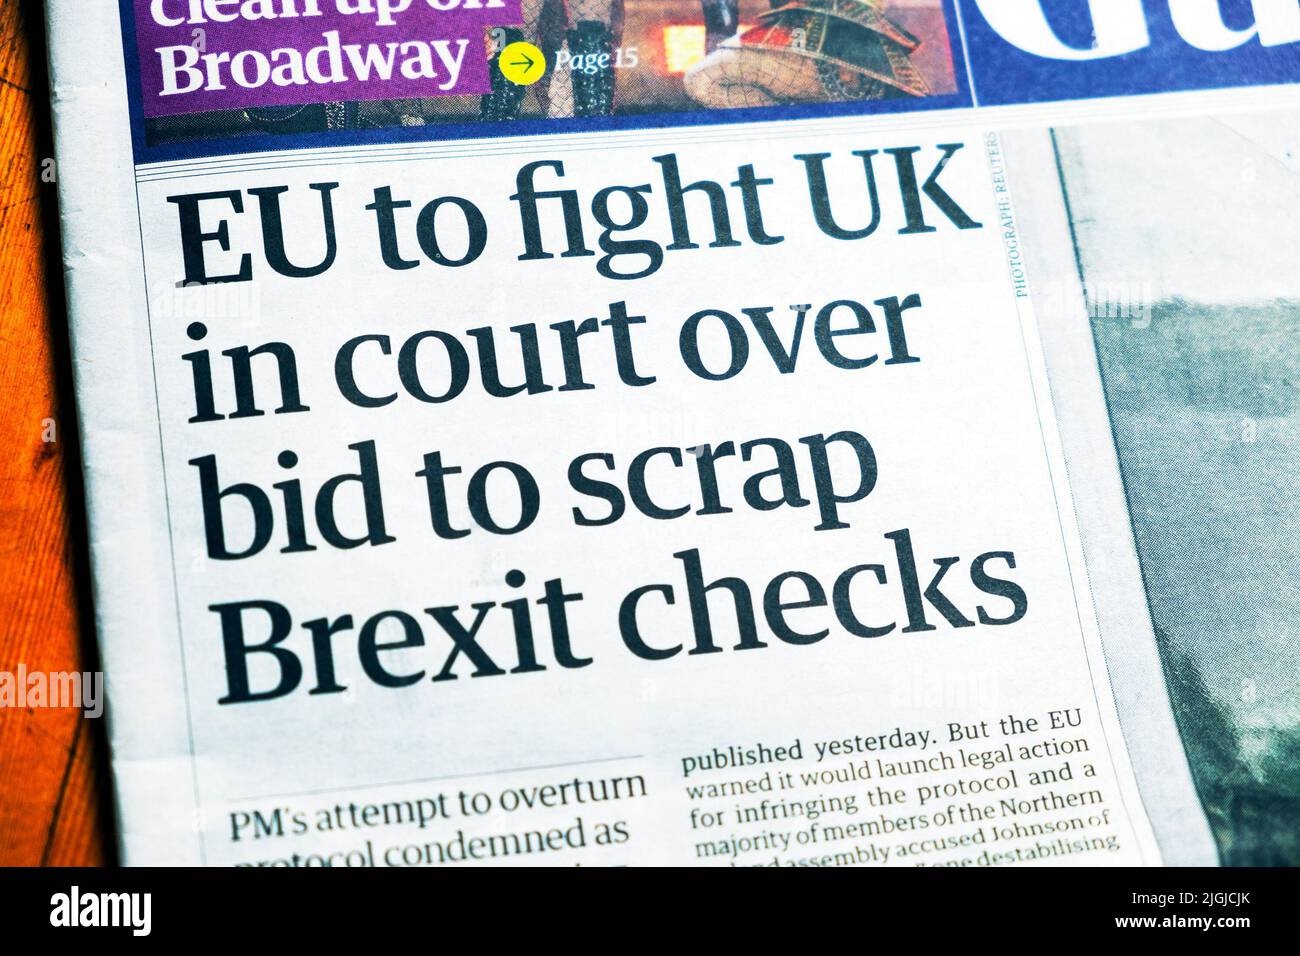 'EU to fight UK in court over bid to scrap Brexit checks' Guardian newspaper headline Northern Ireland protocol front page 14 June 2022 London UK Stock Photo